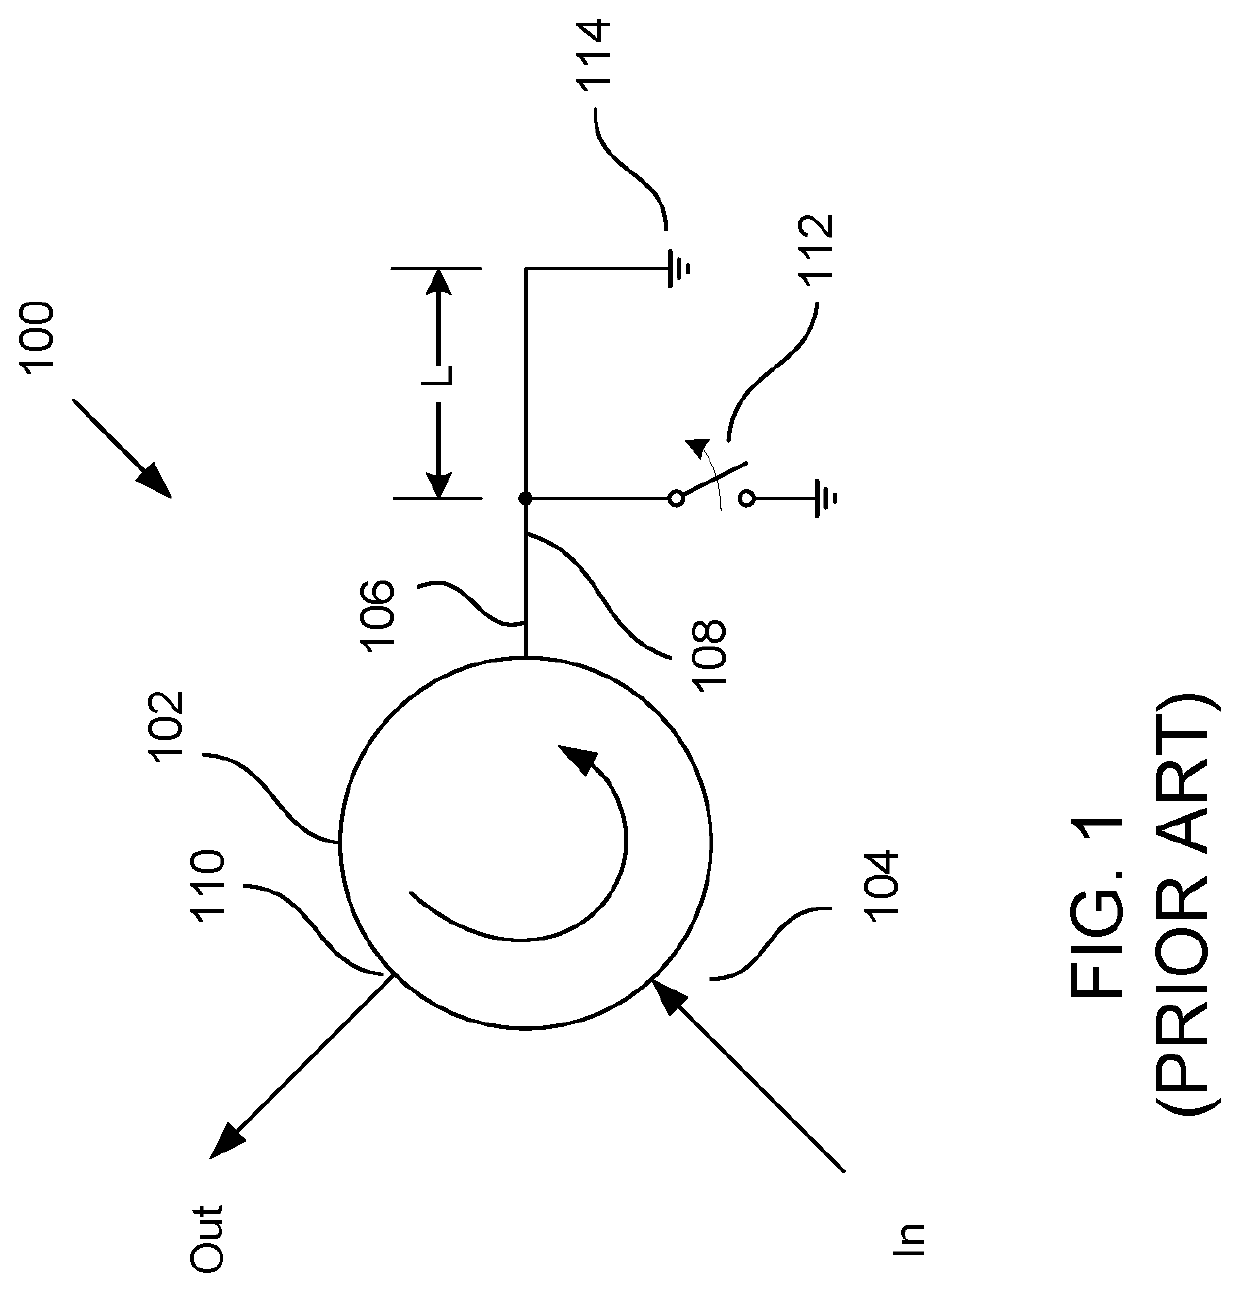 Low loss reflective passive phase shifter using time delay element with double resolution